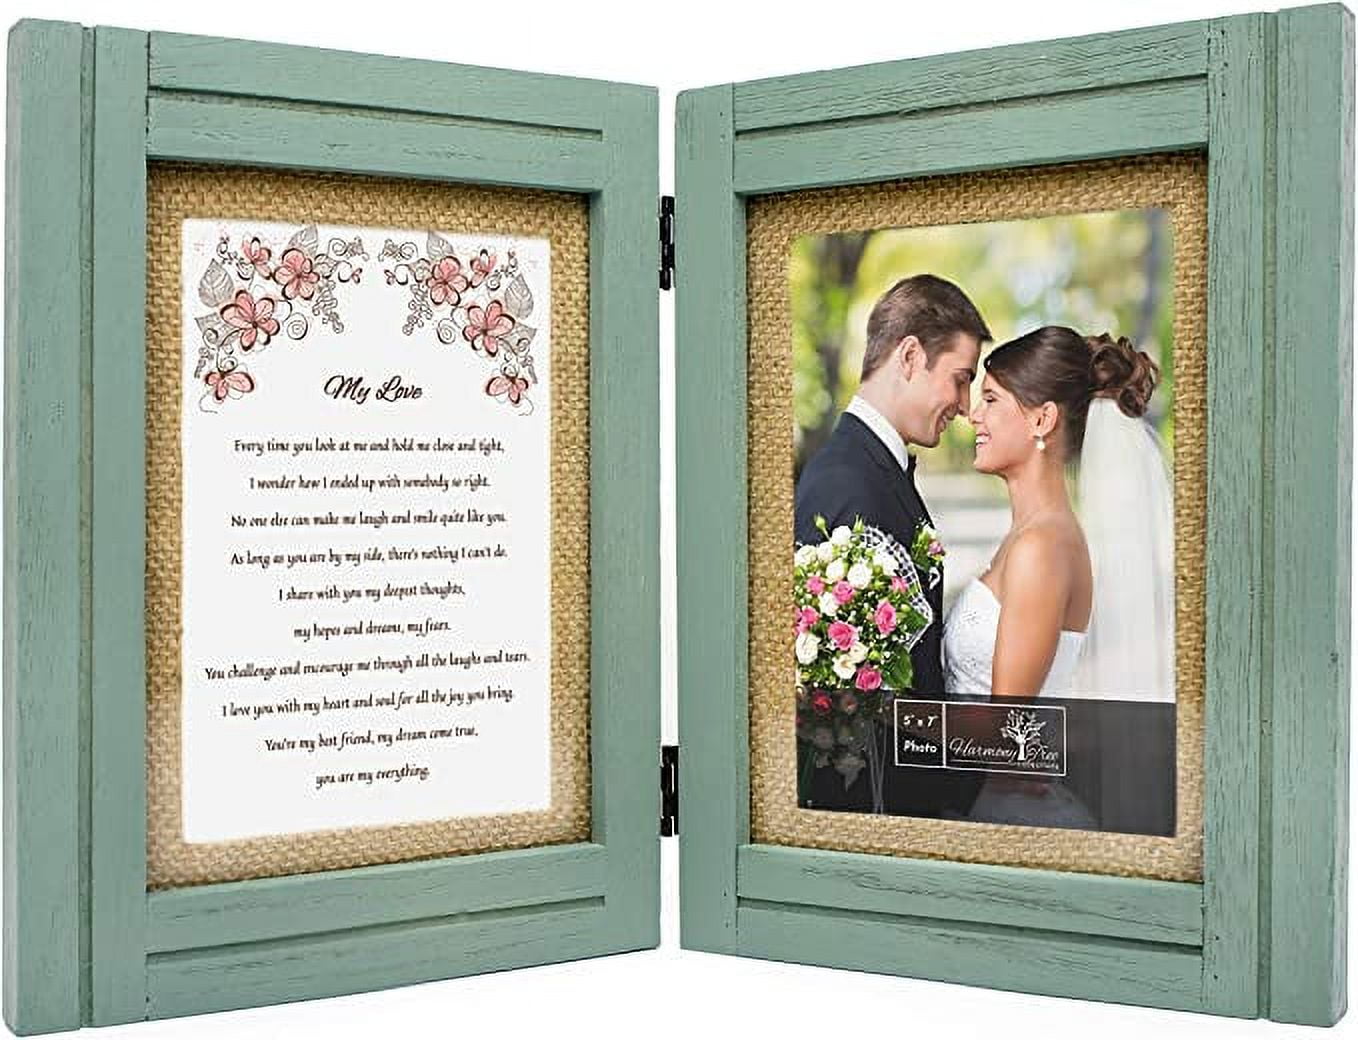 Valentines Day Gifts for Her, Personalized Wedding Picture Frame 5x7 - You and Me, Romantic Wedding Gifts for The Couple, Custom Wedding Photo Frame